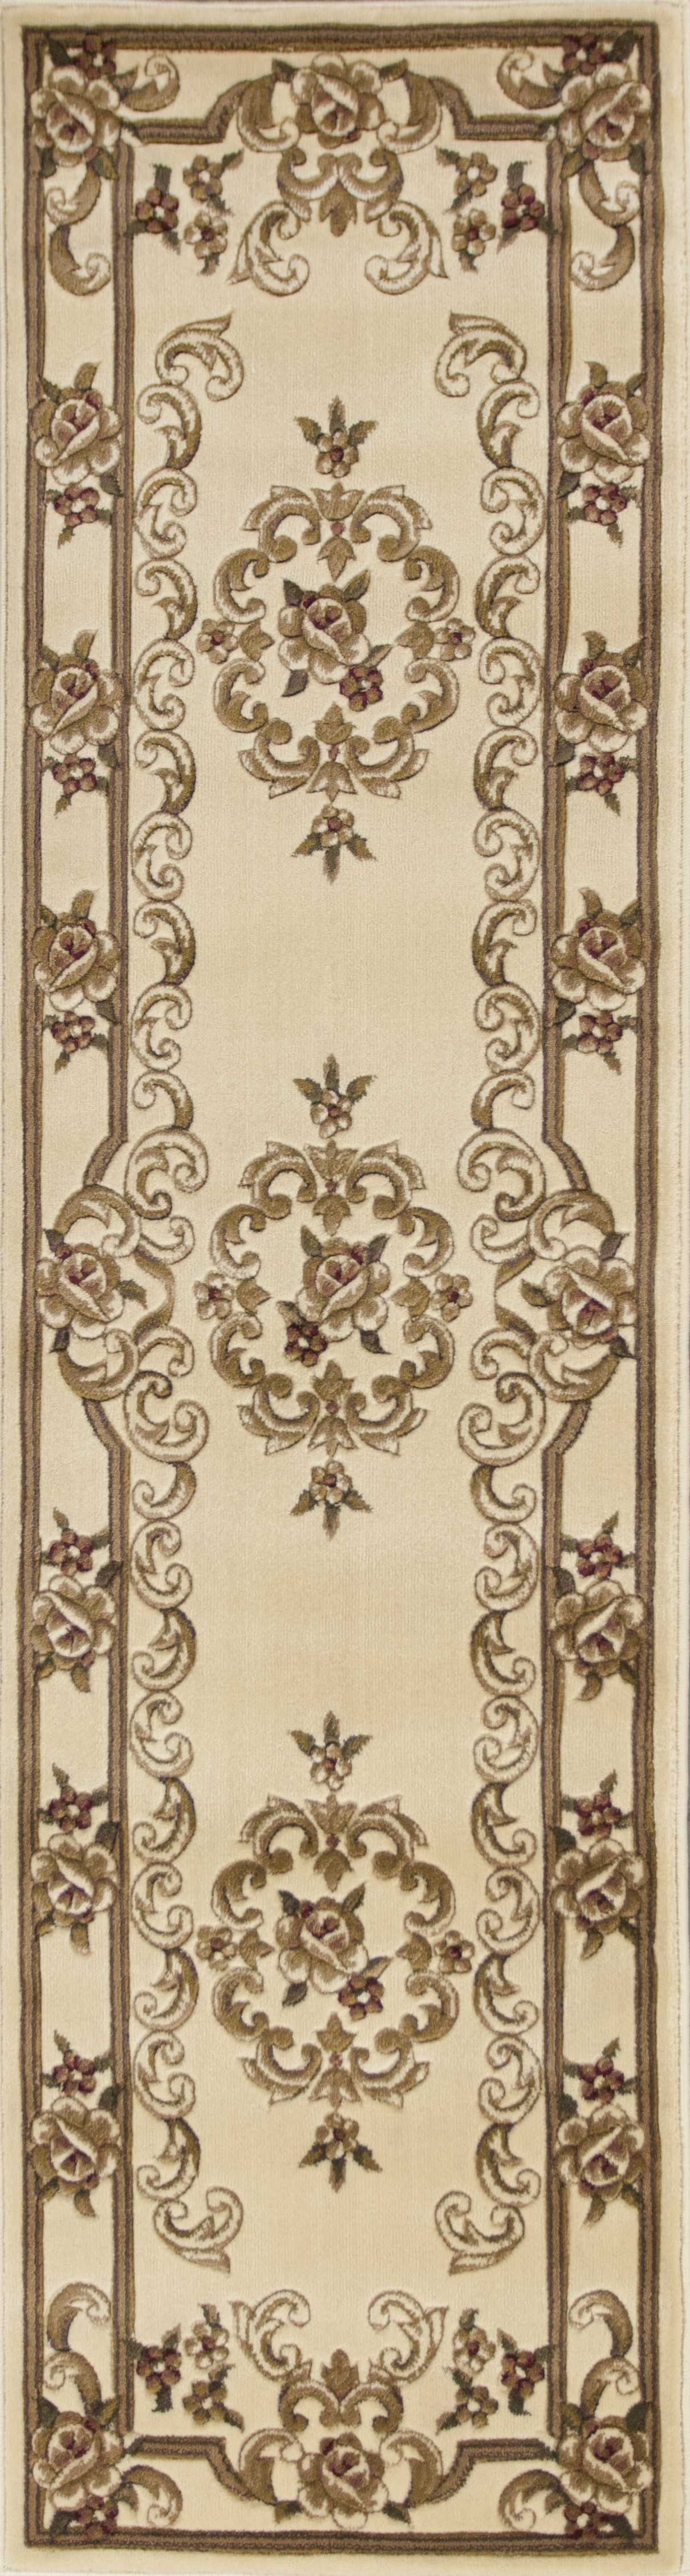 8'X11' Ivory Machine Woven Hand Carved Floral Medallion Indoor Area Rug